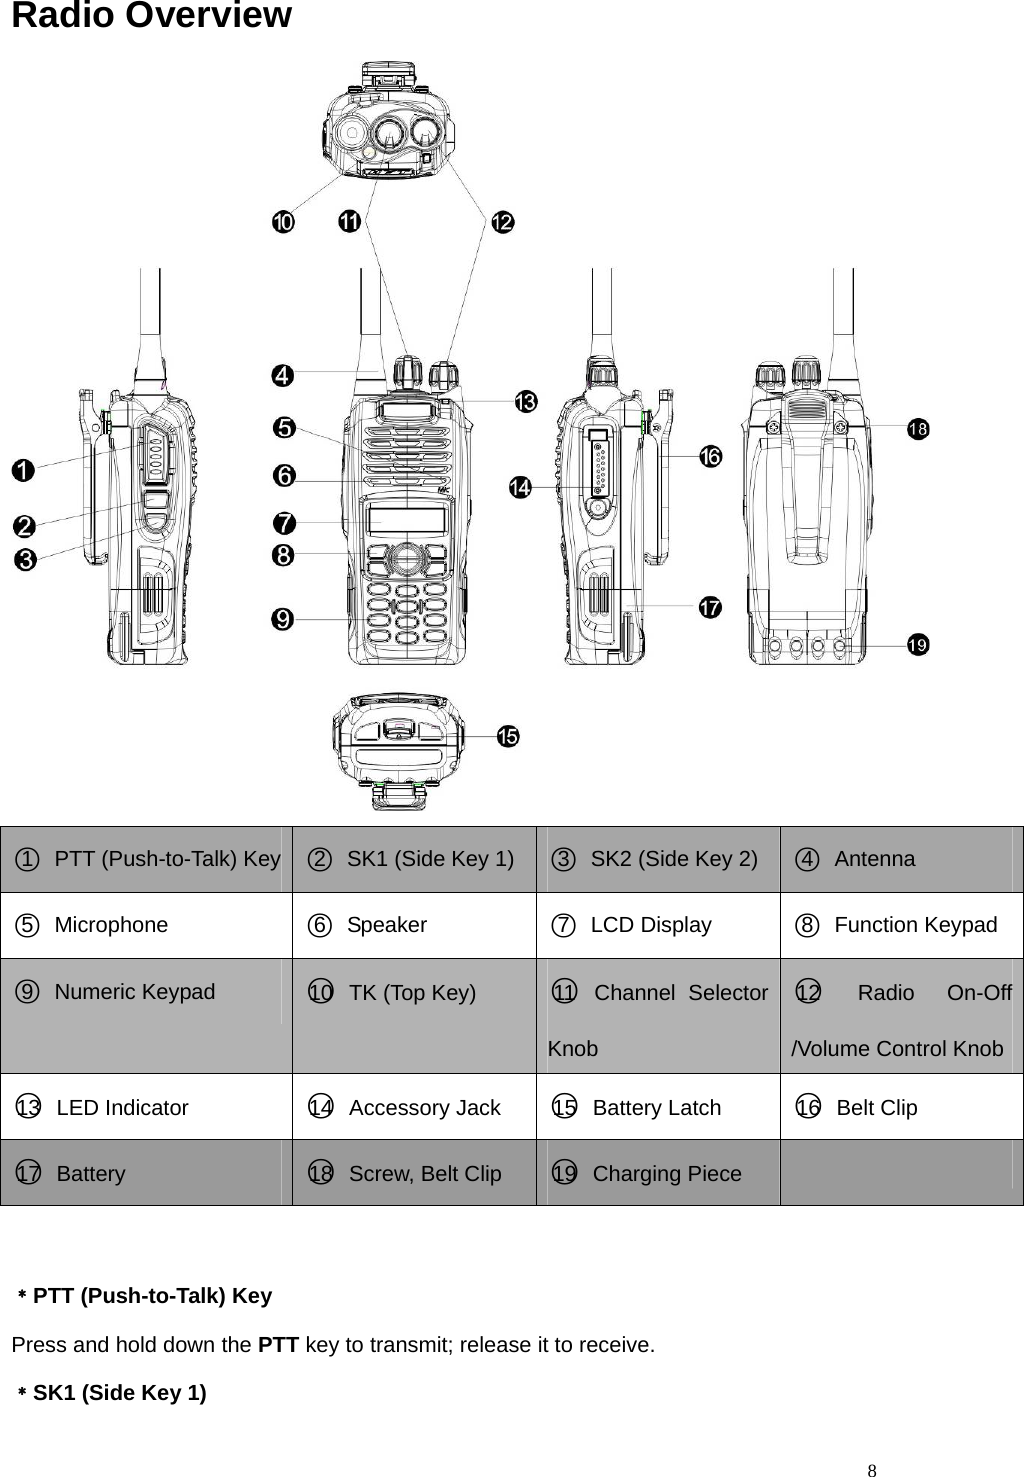   8Radio Overview  ○1   PTT (Push-to-Talk) Key  ○2   SK1 (Side Key 1)  ○3   SK2 (Side Key 2)  ○4  Antenna ○5  Microphone  ○6  Speaker  ○7  LCD Display  ○8  Function Keypad ○9  Numeric Keypad   ○10   TK (Top Key)  ○11  Channel Selector Knob ○12  Radio  On-Off /Volume Control Knob ○13  LED Indicator  ○14  Accessory Jack  ○15  Battery Latch   ○16  Belt Clip ○17  Battery  ○18  Screw, Belt Clip  ○19  Charging Piece     ﹡PTT (Push-to-Talk) Key Press and hold down the PTT key to transmit; release it to receive. ﹡SK1 (Side Key 1) 